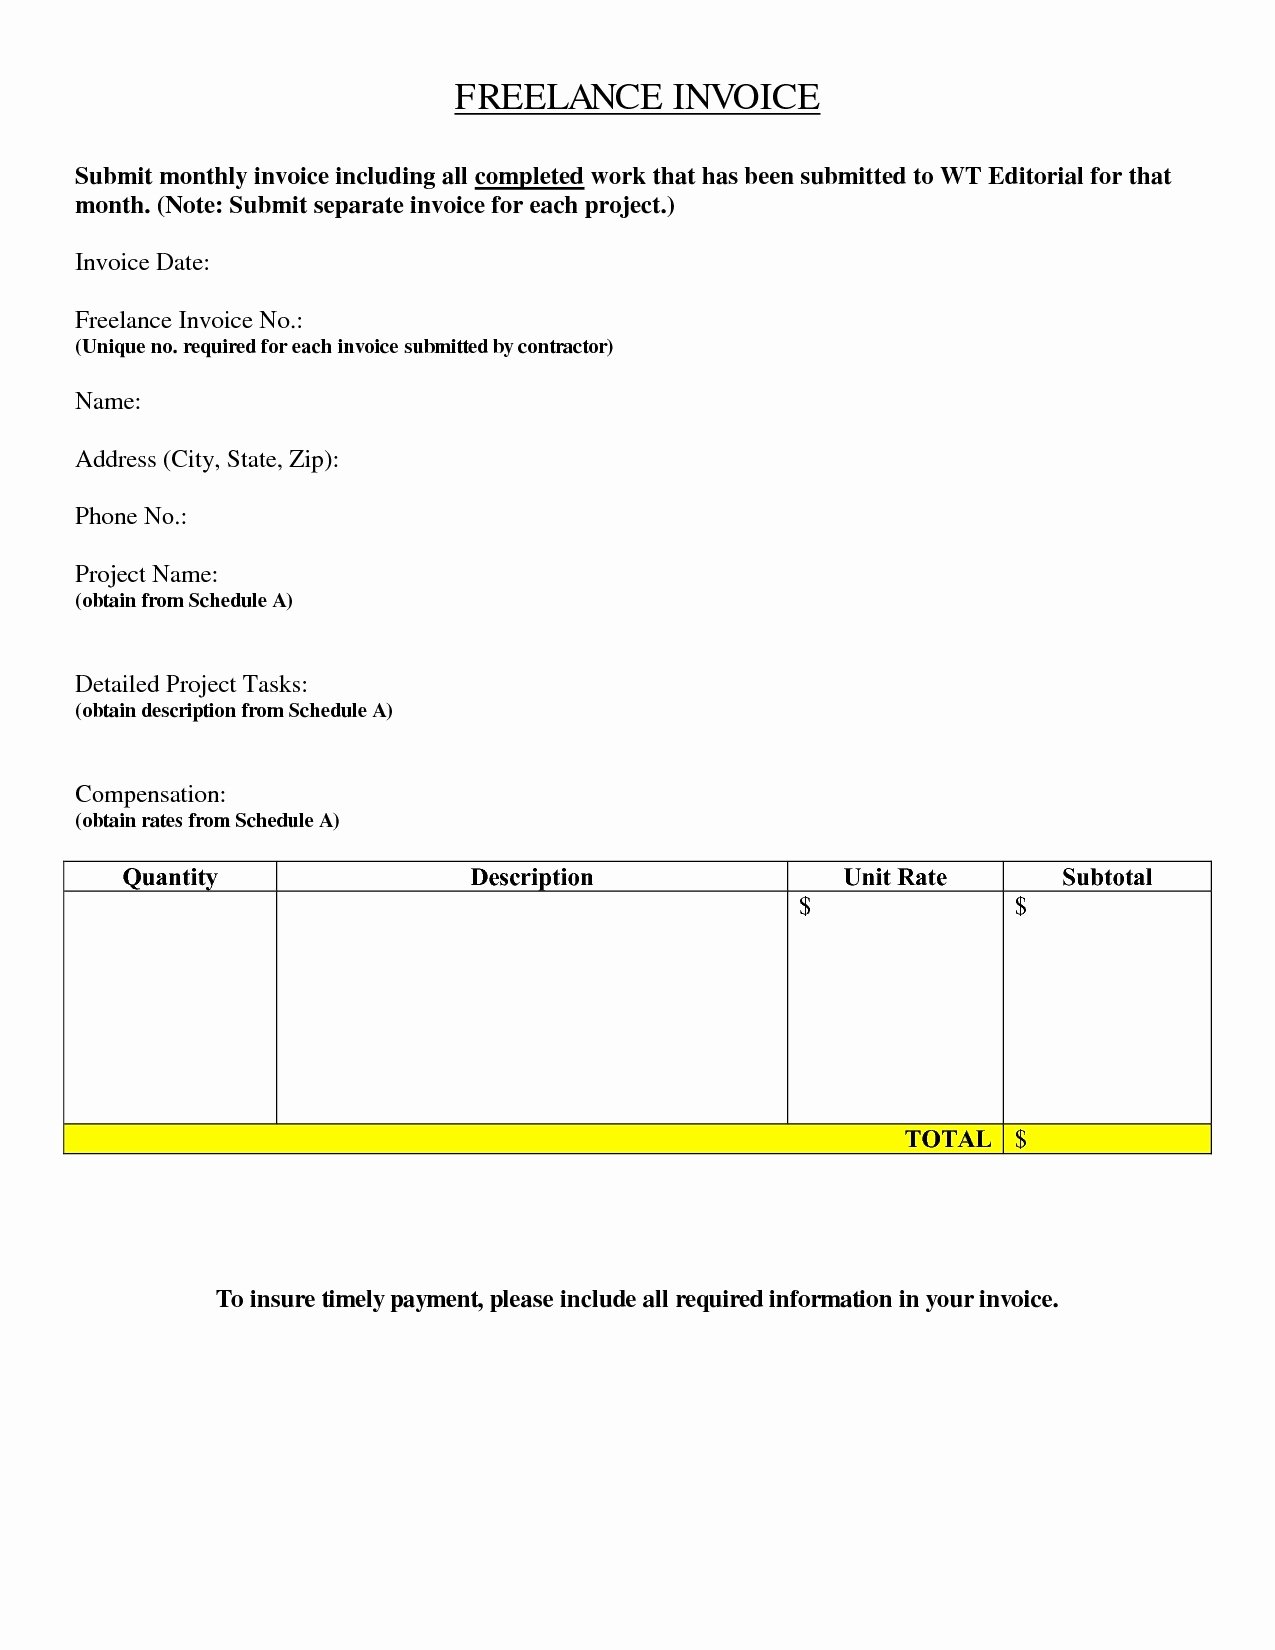 Invoice Template for Freelance Best Of Invoice for Freelance Work Invoice Template Ideas